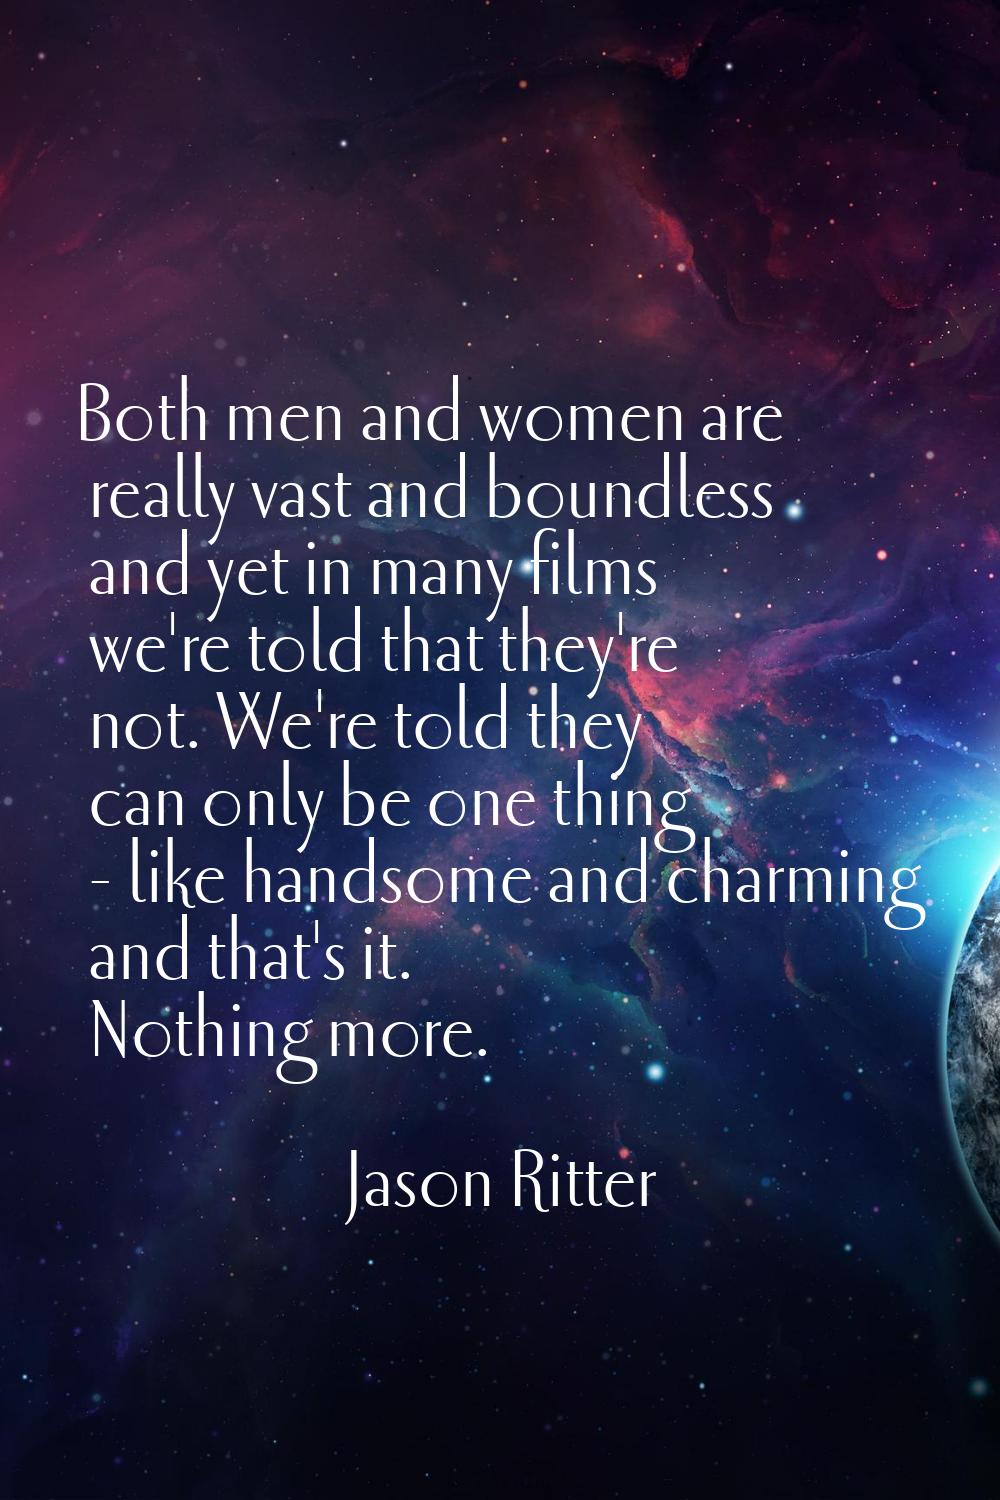 Both men and women are really vast and boundless and yet in many films we're told that they're not.